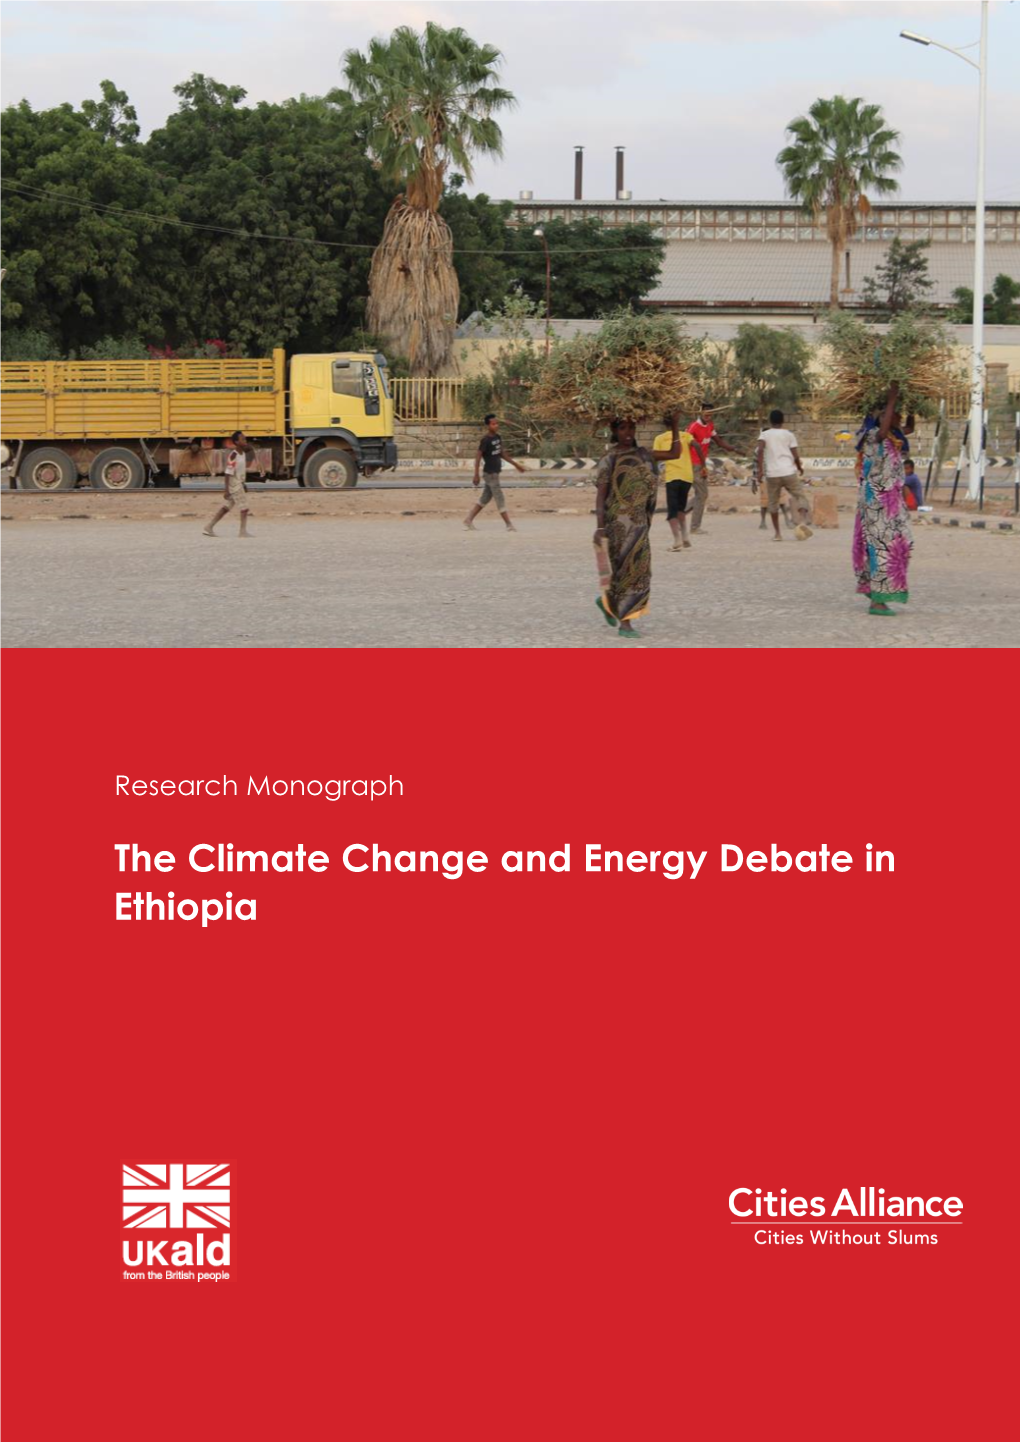 The Climate Change and Energy Debate in Ethiopia